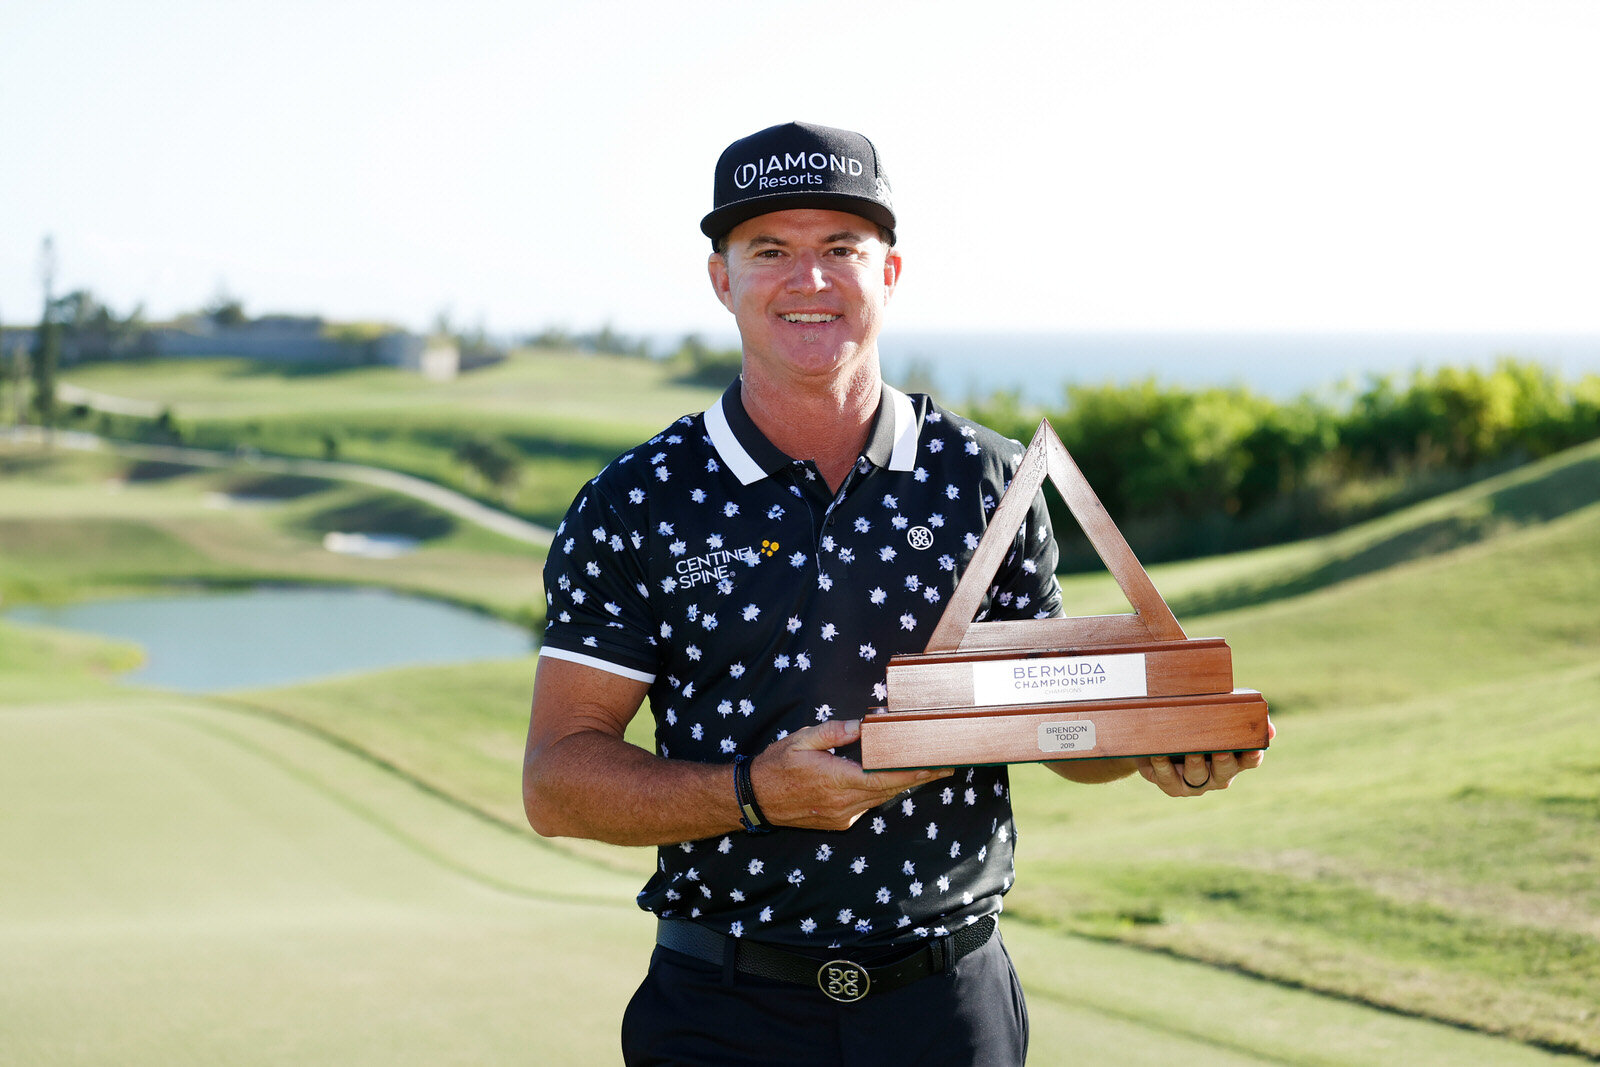  SOUTHAMPTON, BERMUDA - NOVEMBER 01: Brian Gay of the United States celebrates with the trophy after winning during a playoff in the final round of the Bermuda Championship at Port Royal Golf Course on November 01, 2020 in Southampton, Bermuda. (Phot